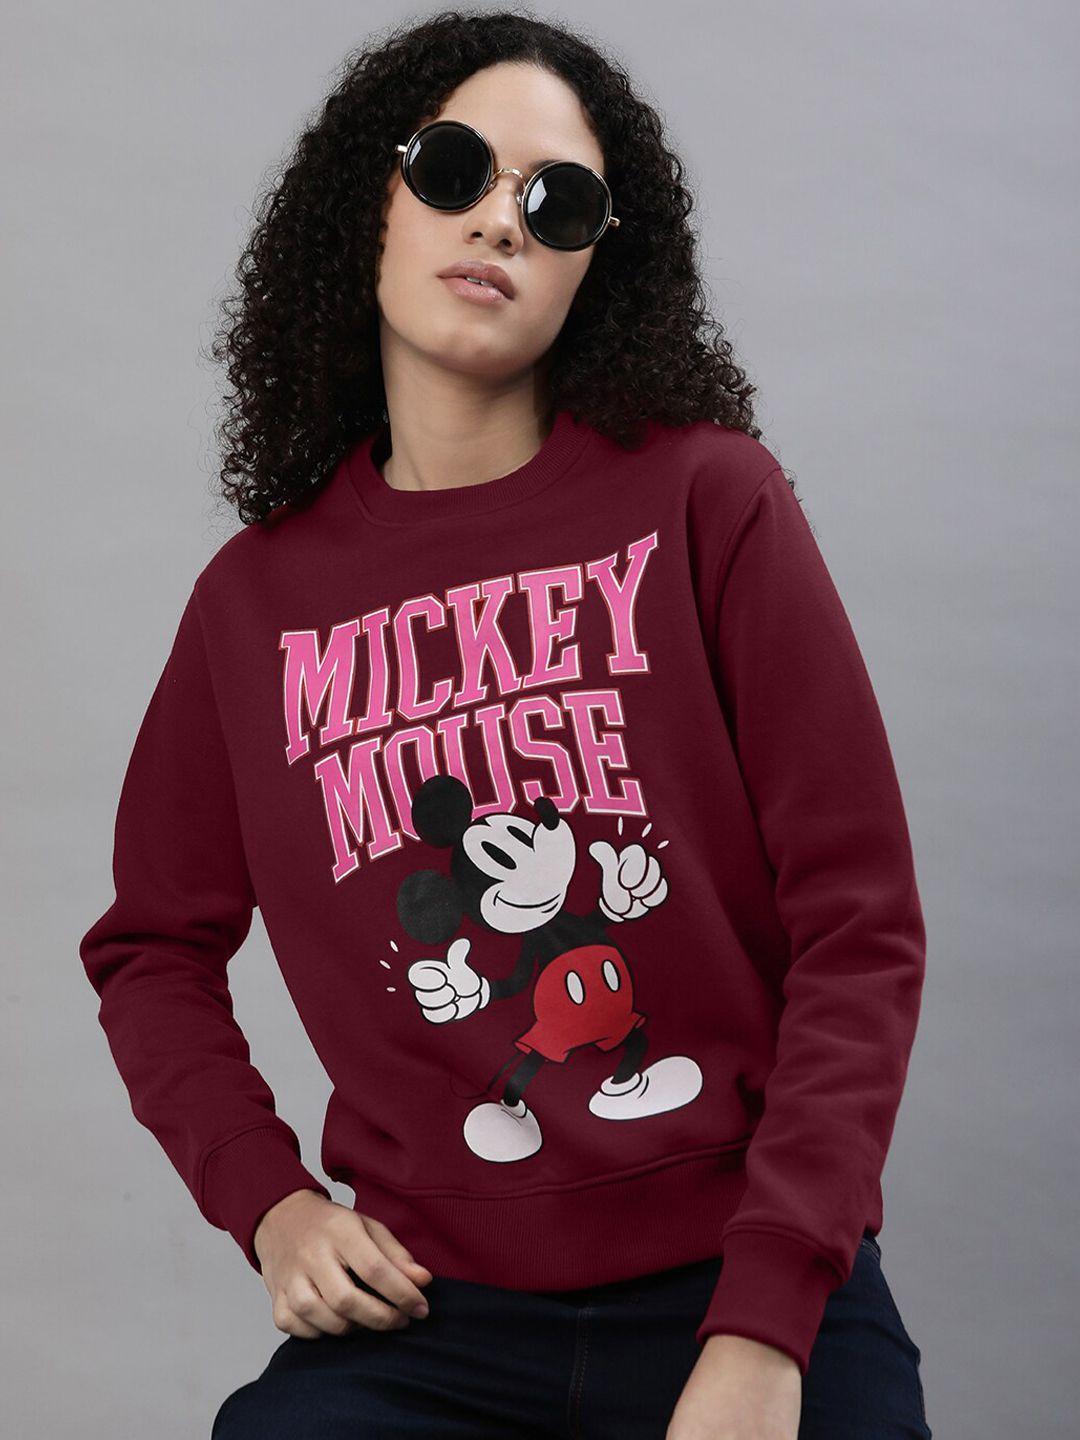 free authority mickey mouse printed cotton sweatshirt